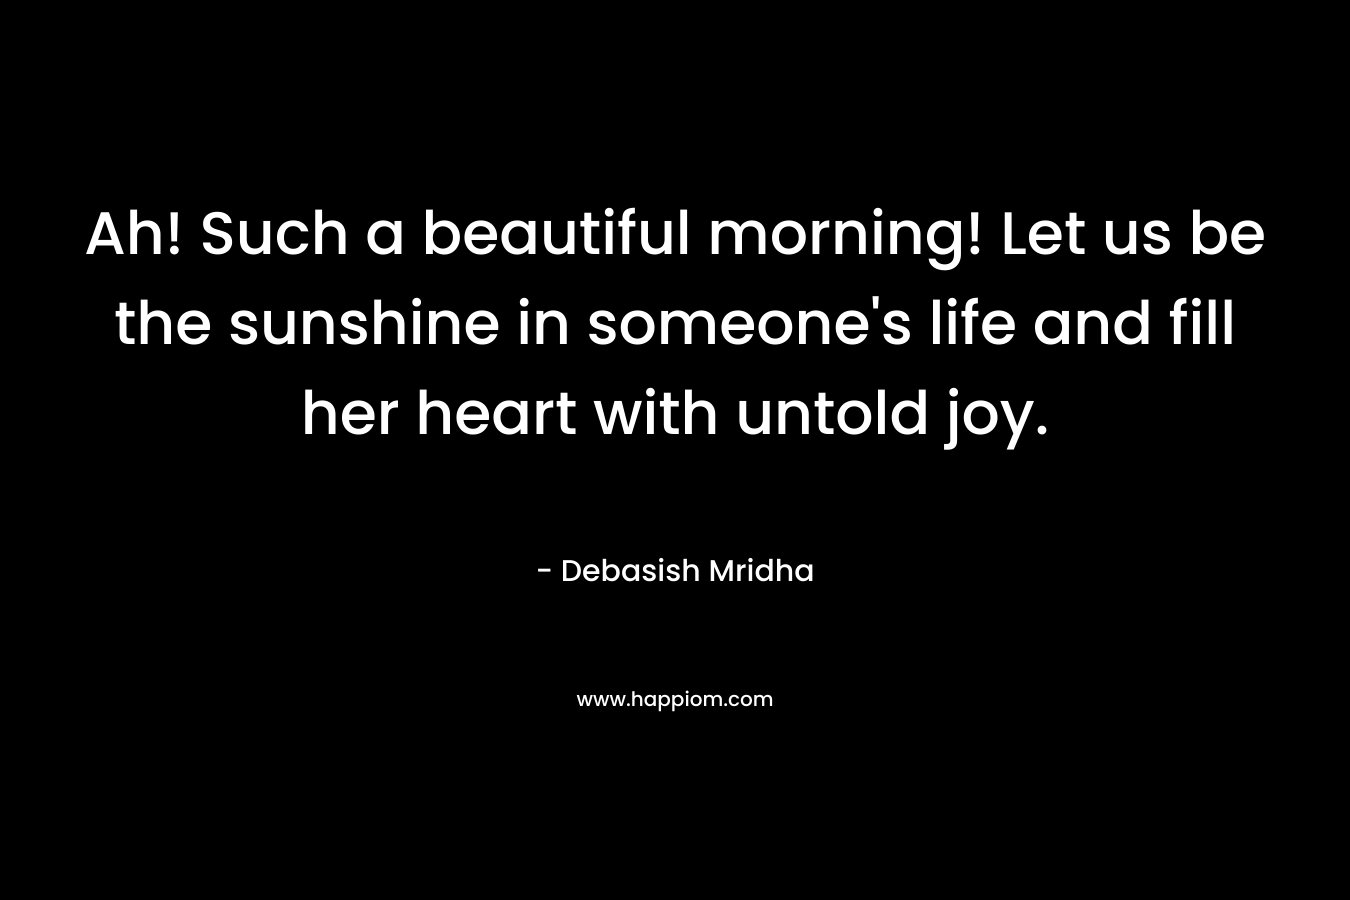 Ah! Such a beautiful morning! Let us be the sunshine in someone's life and fill her heart with untold joy.